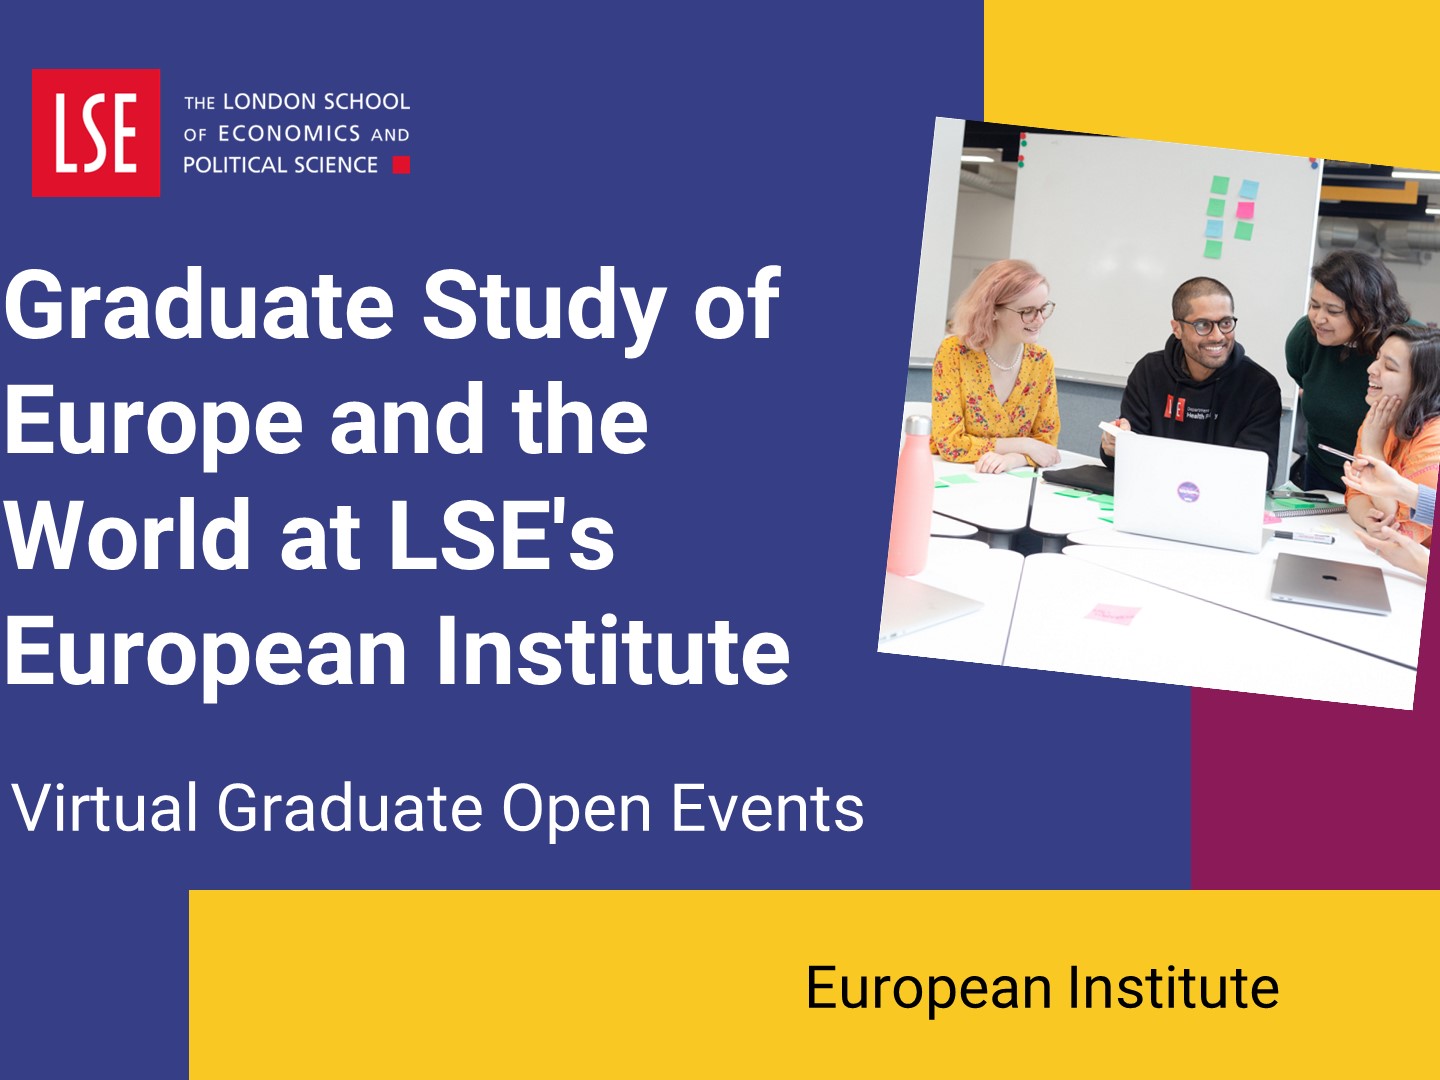 Graduate Study of Europe and the World at LSEs European Institute